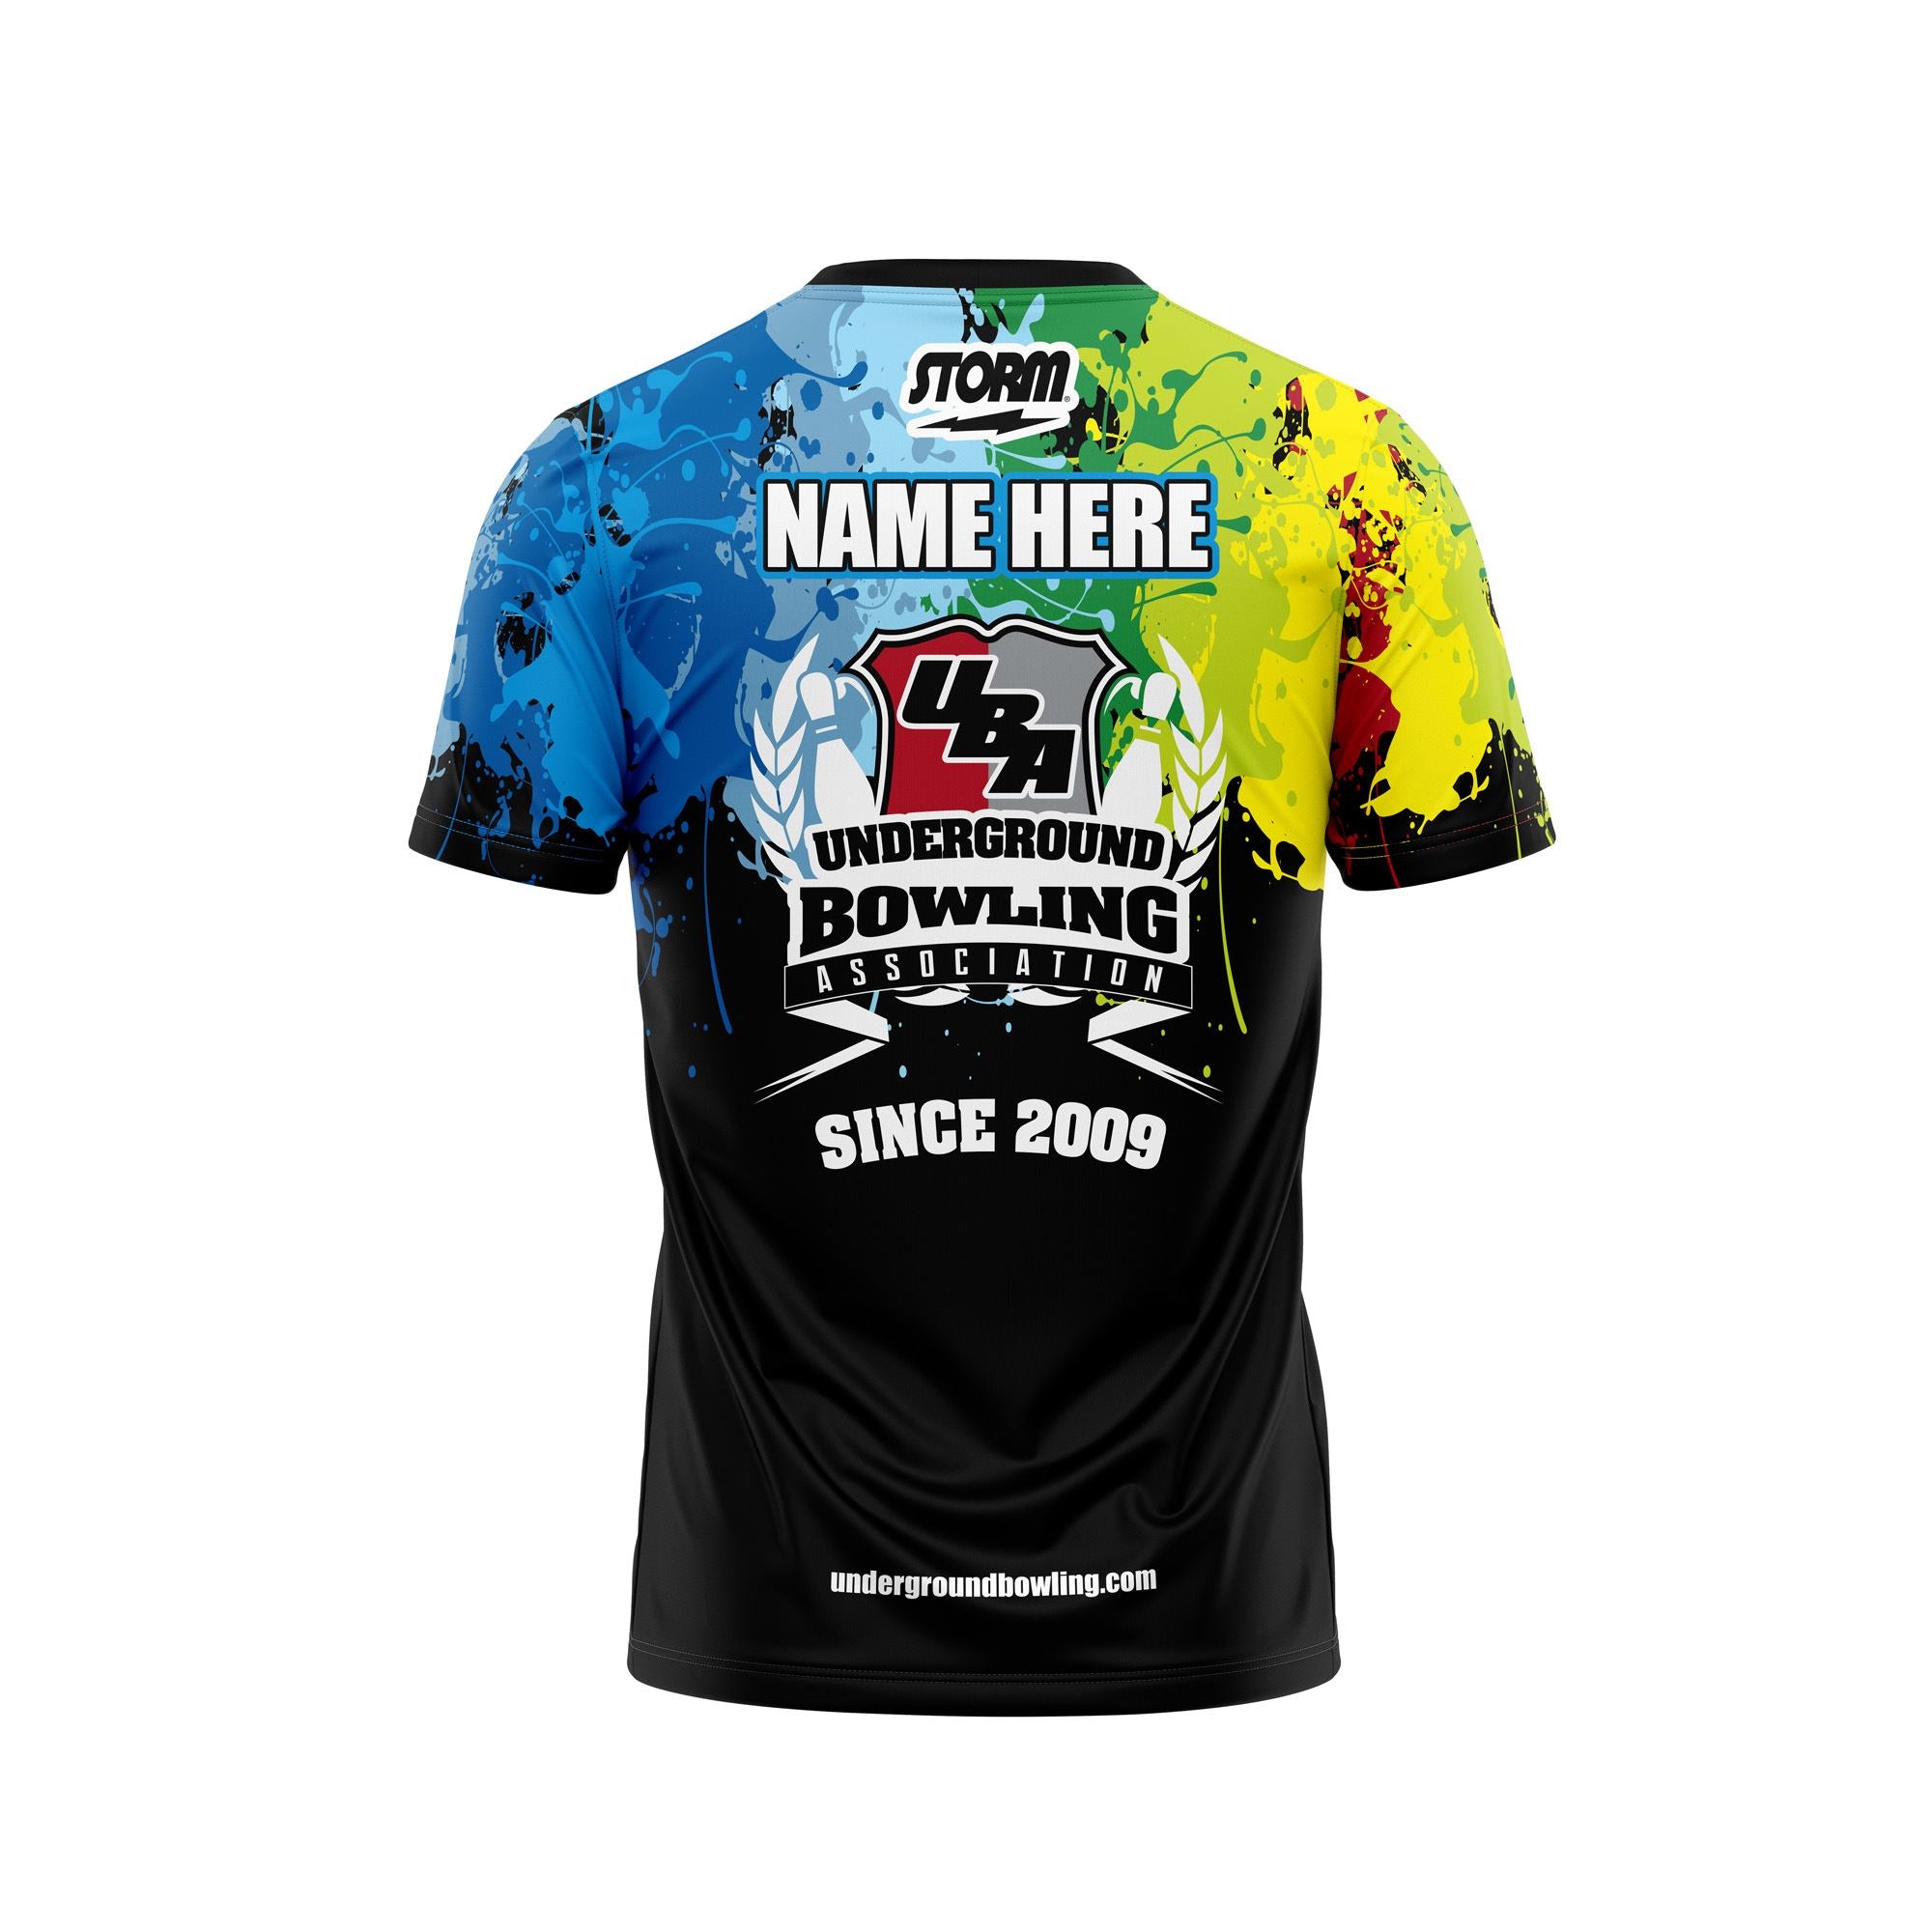 About The Money Paint Jerseys